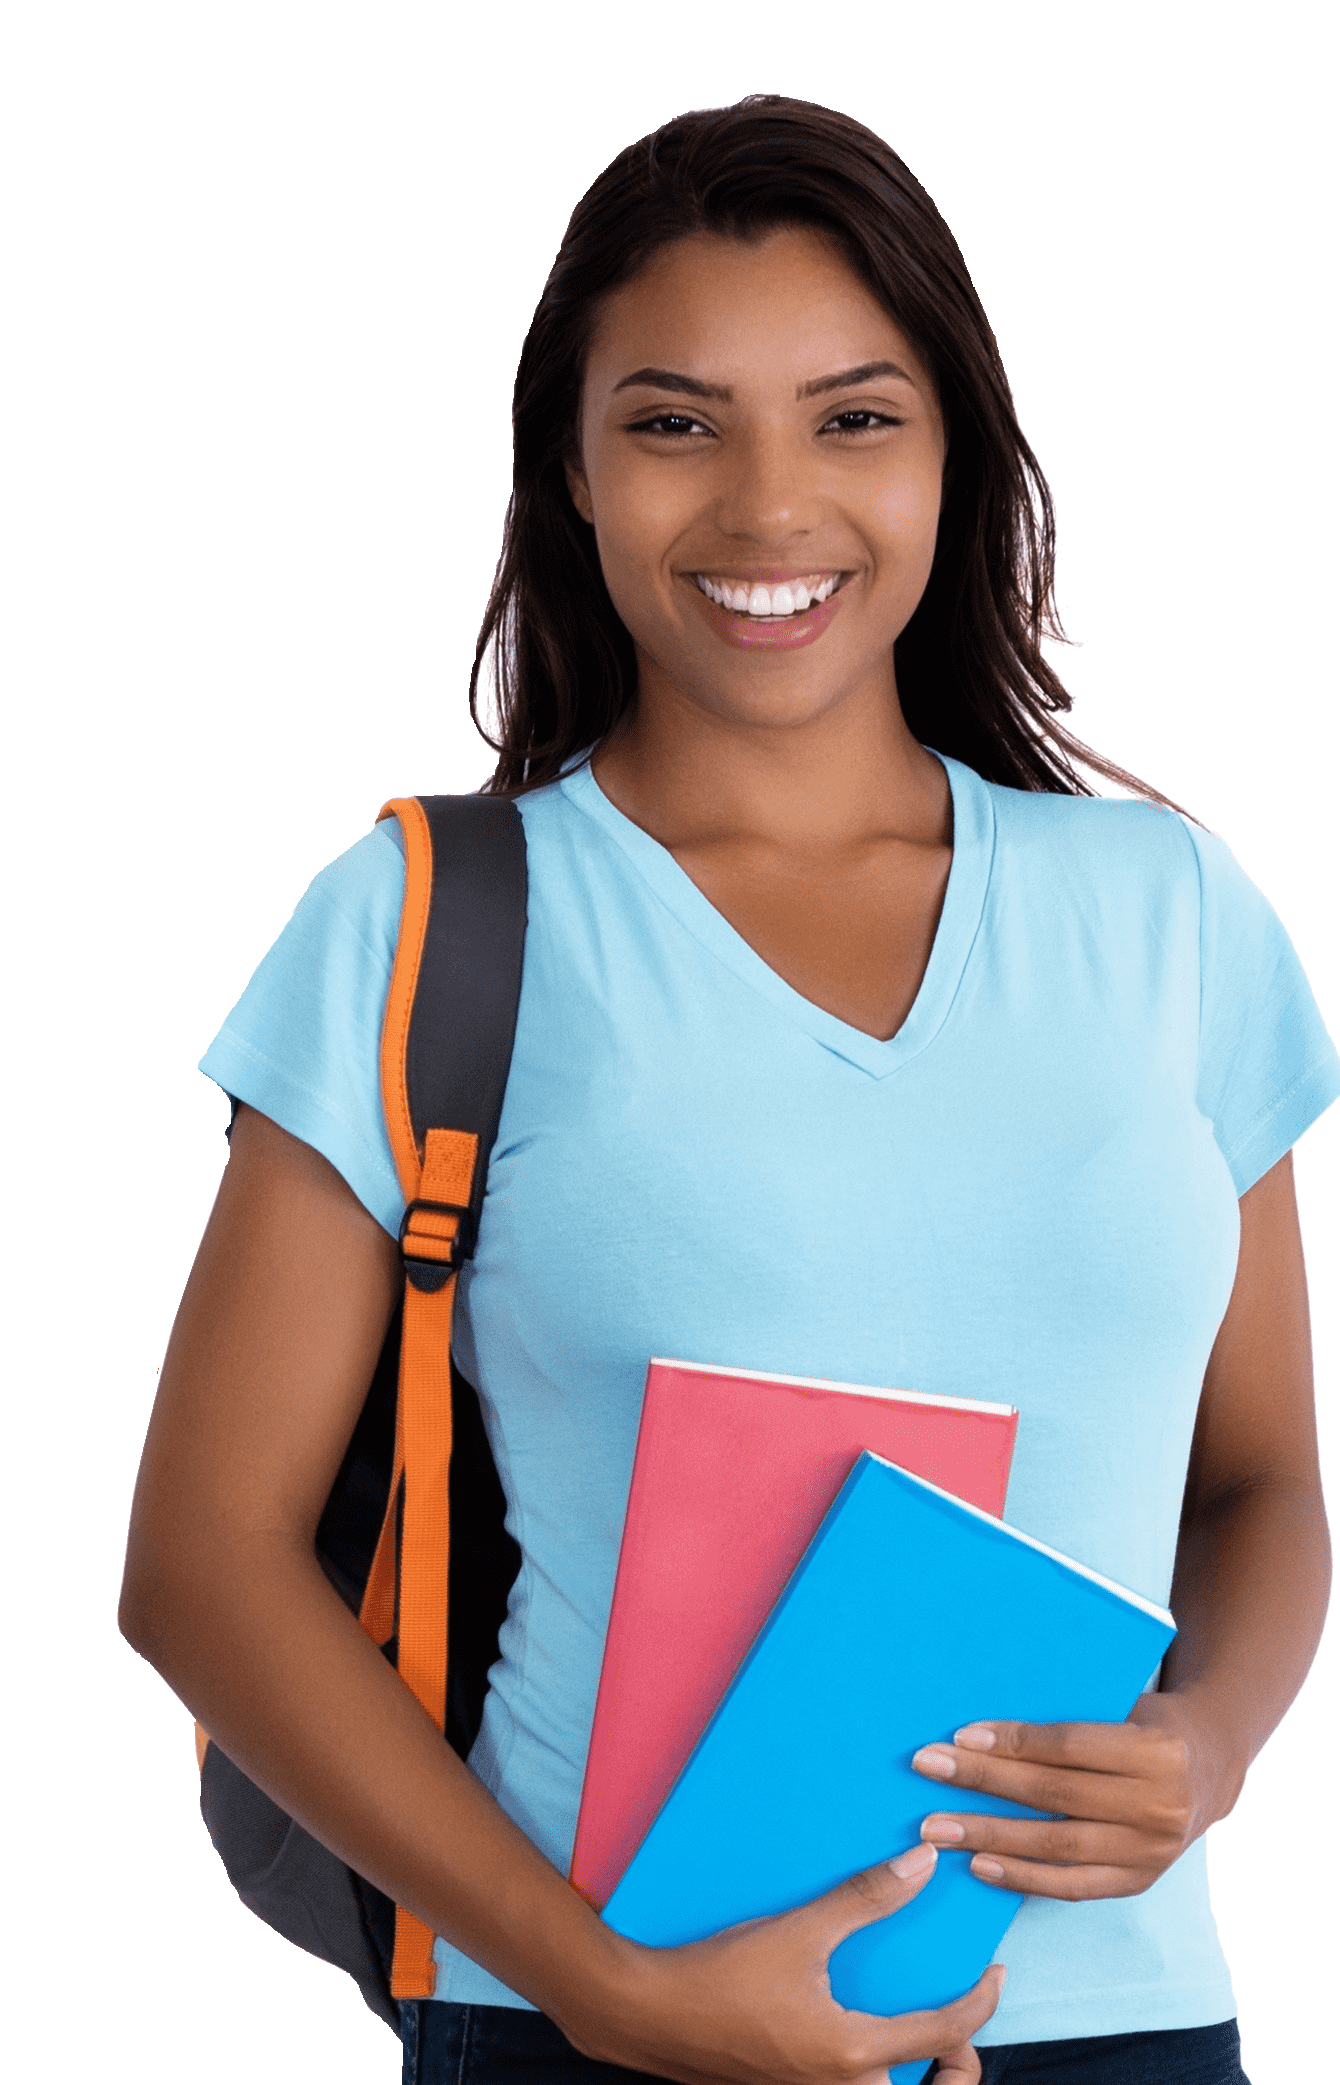 The Friendly Tutors offers online tutoring services nationally